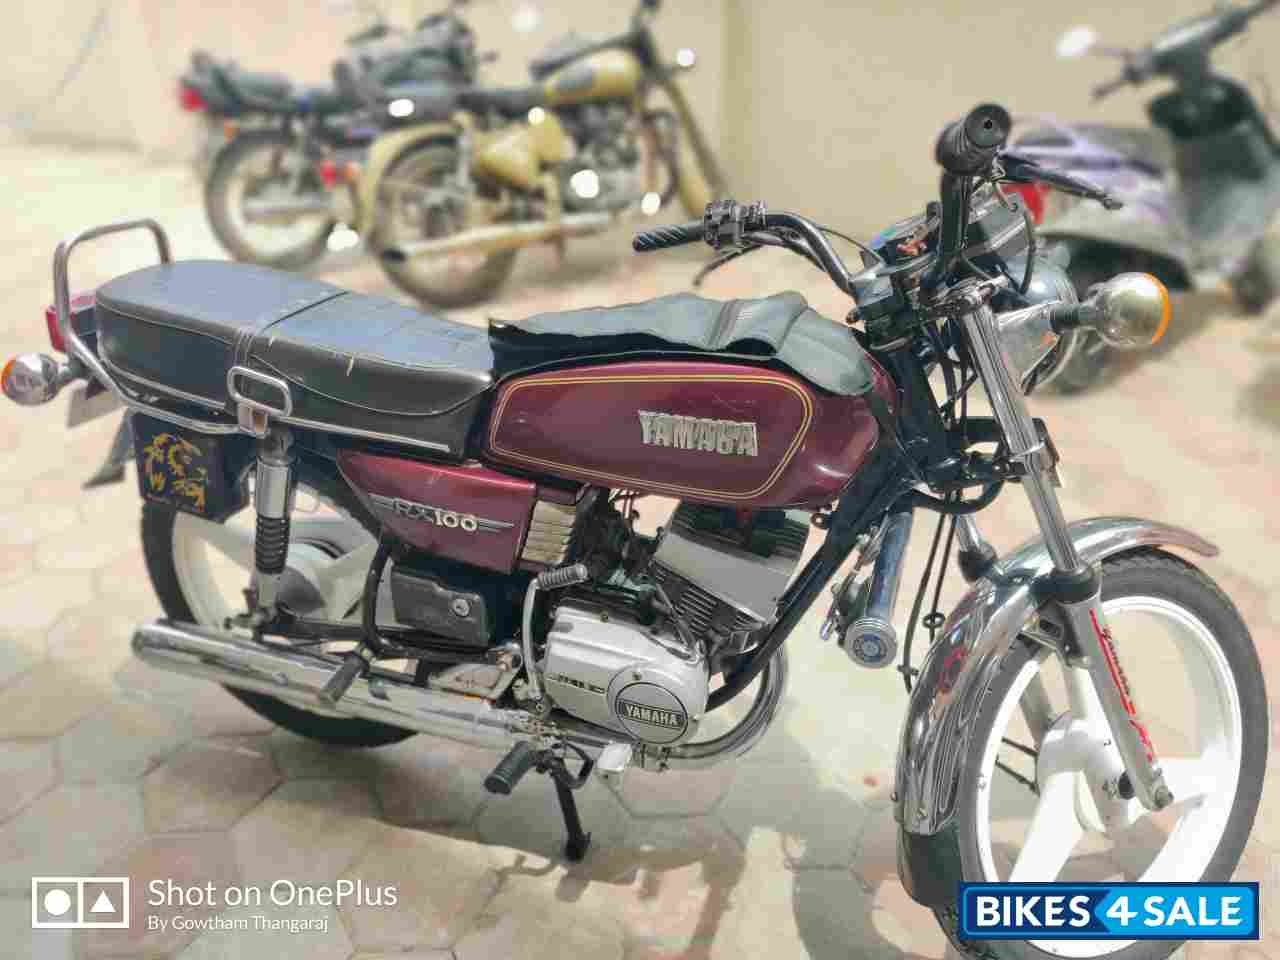 Used 1991 Model Yamaha Rx 100 For Sale In Chennai Id 239261 Red